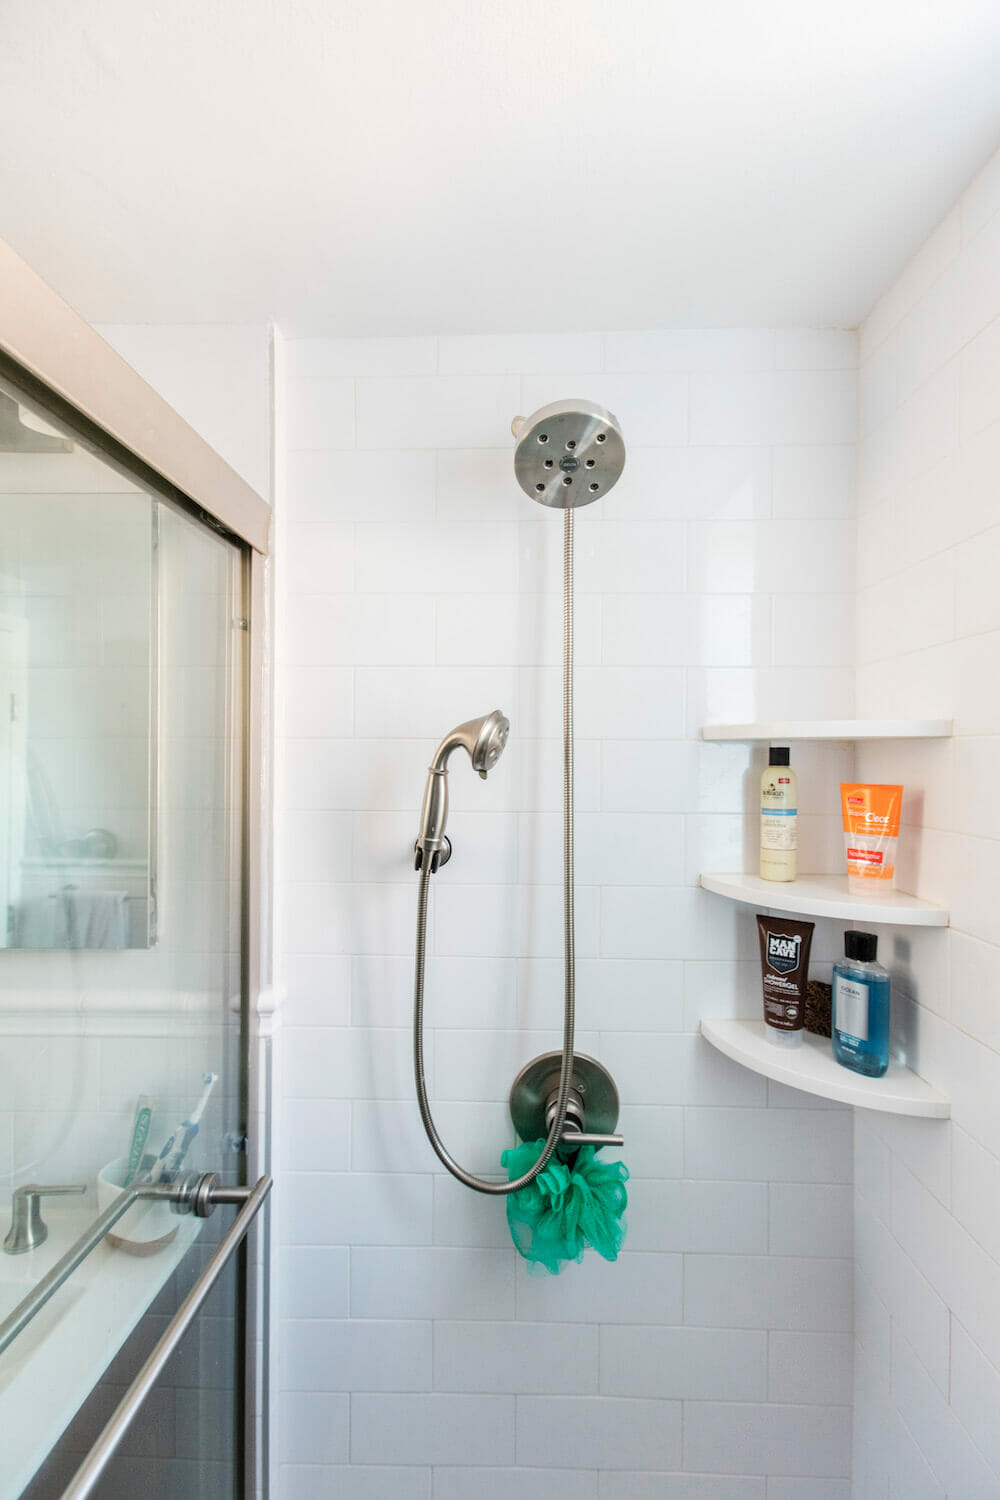 Large nickel showerhead and open shelves in a white walk in shower area with subway tiles after renovation